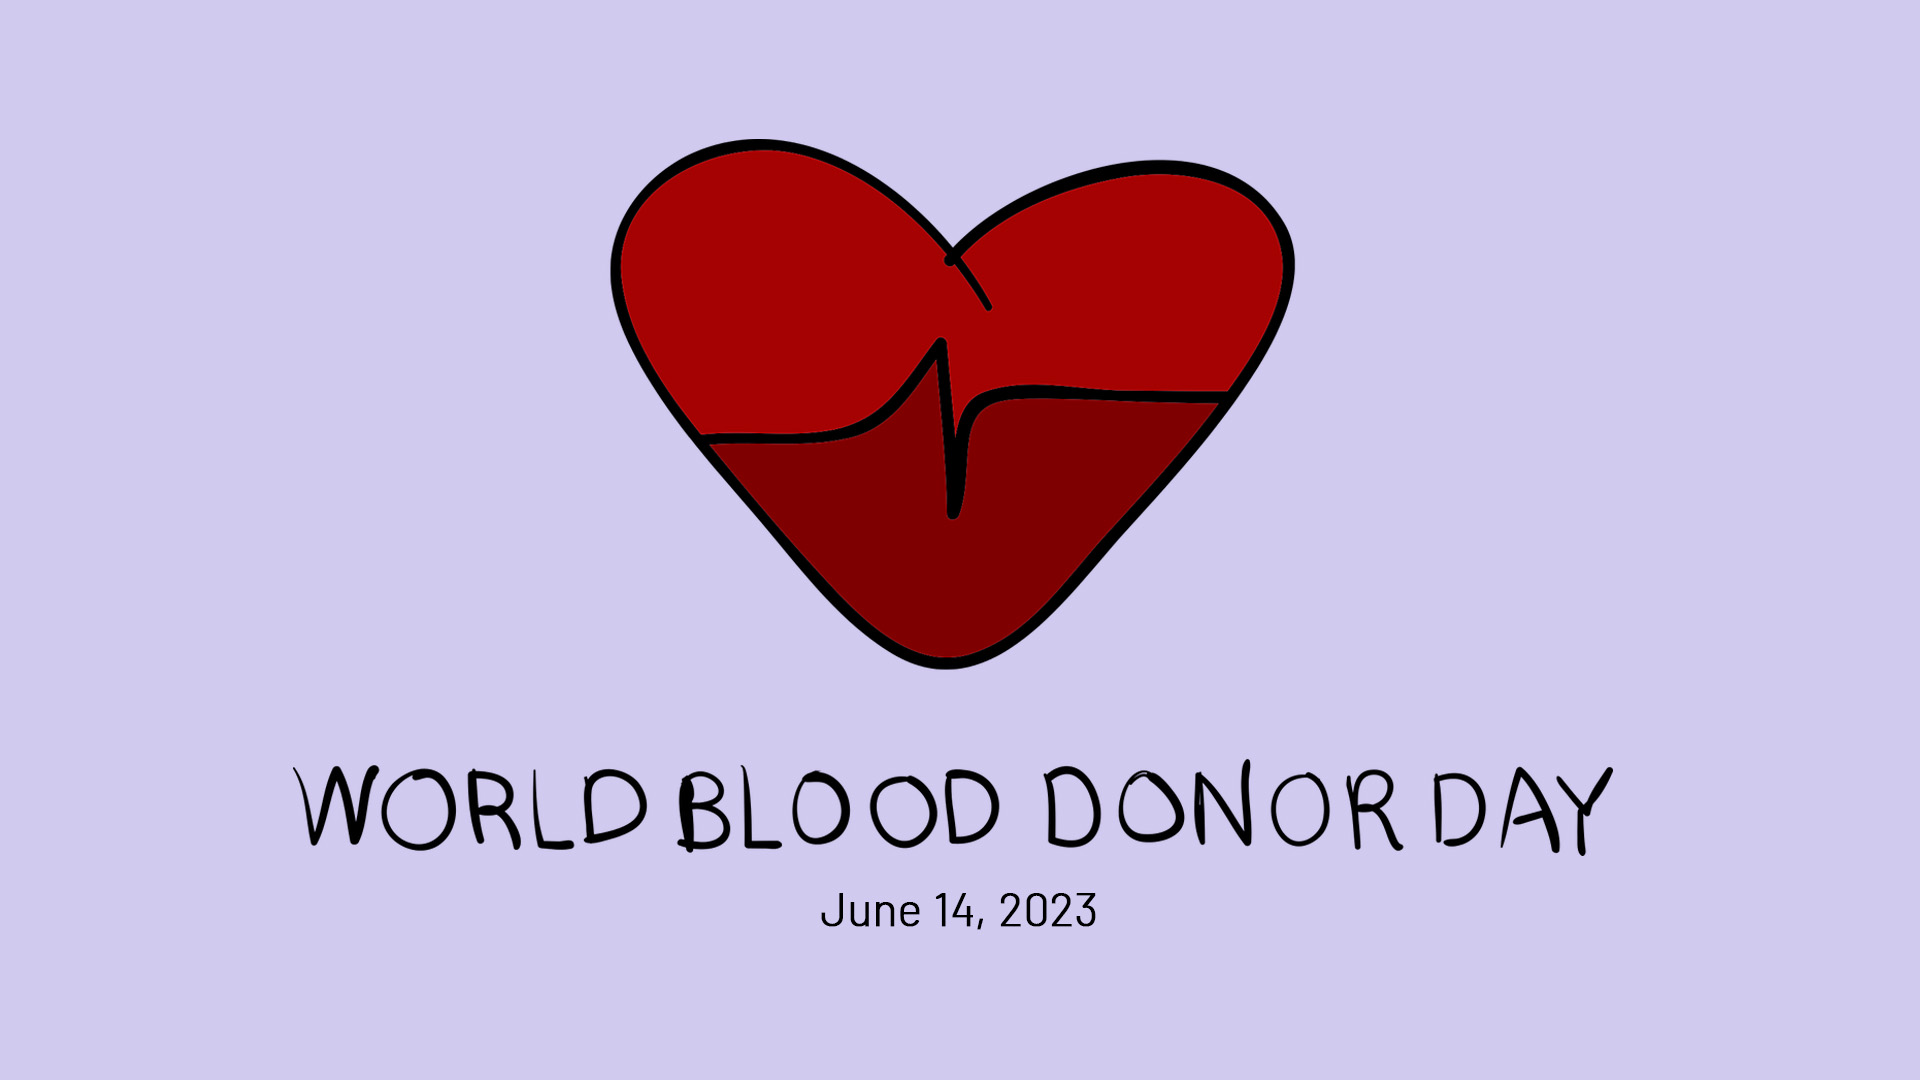 Light purple background with a big duo toned red heart in the middle of the craphic. Below it reads World Blood Donor Day June 14th, 2023.